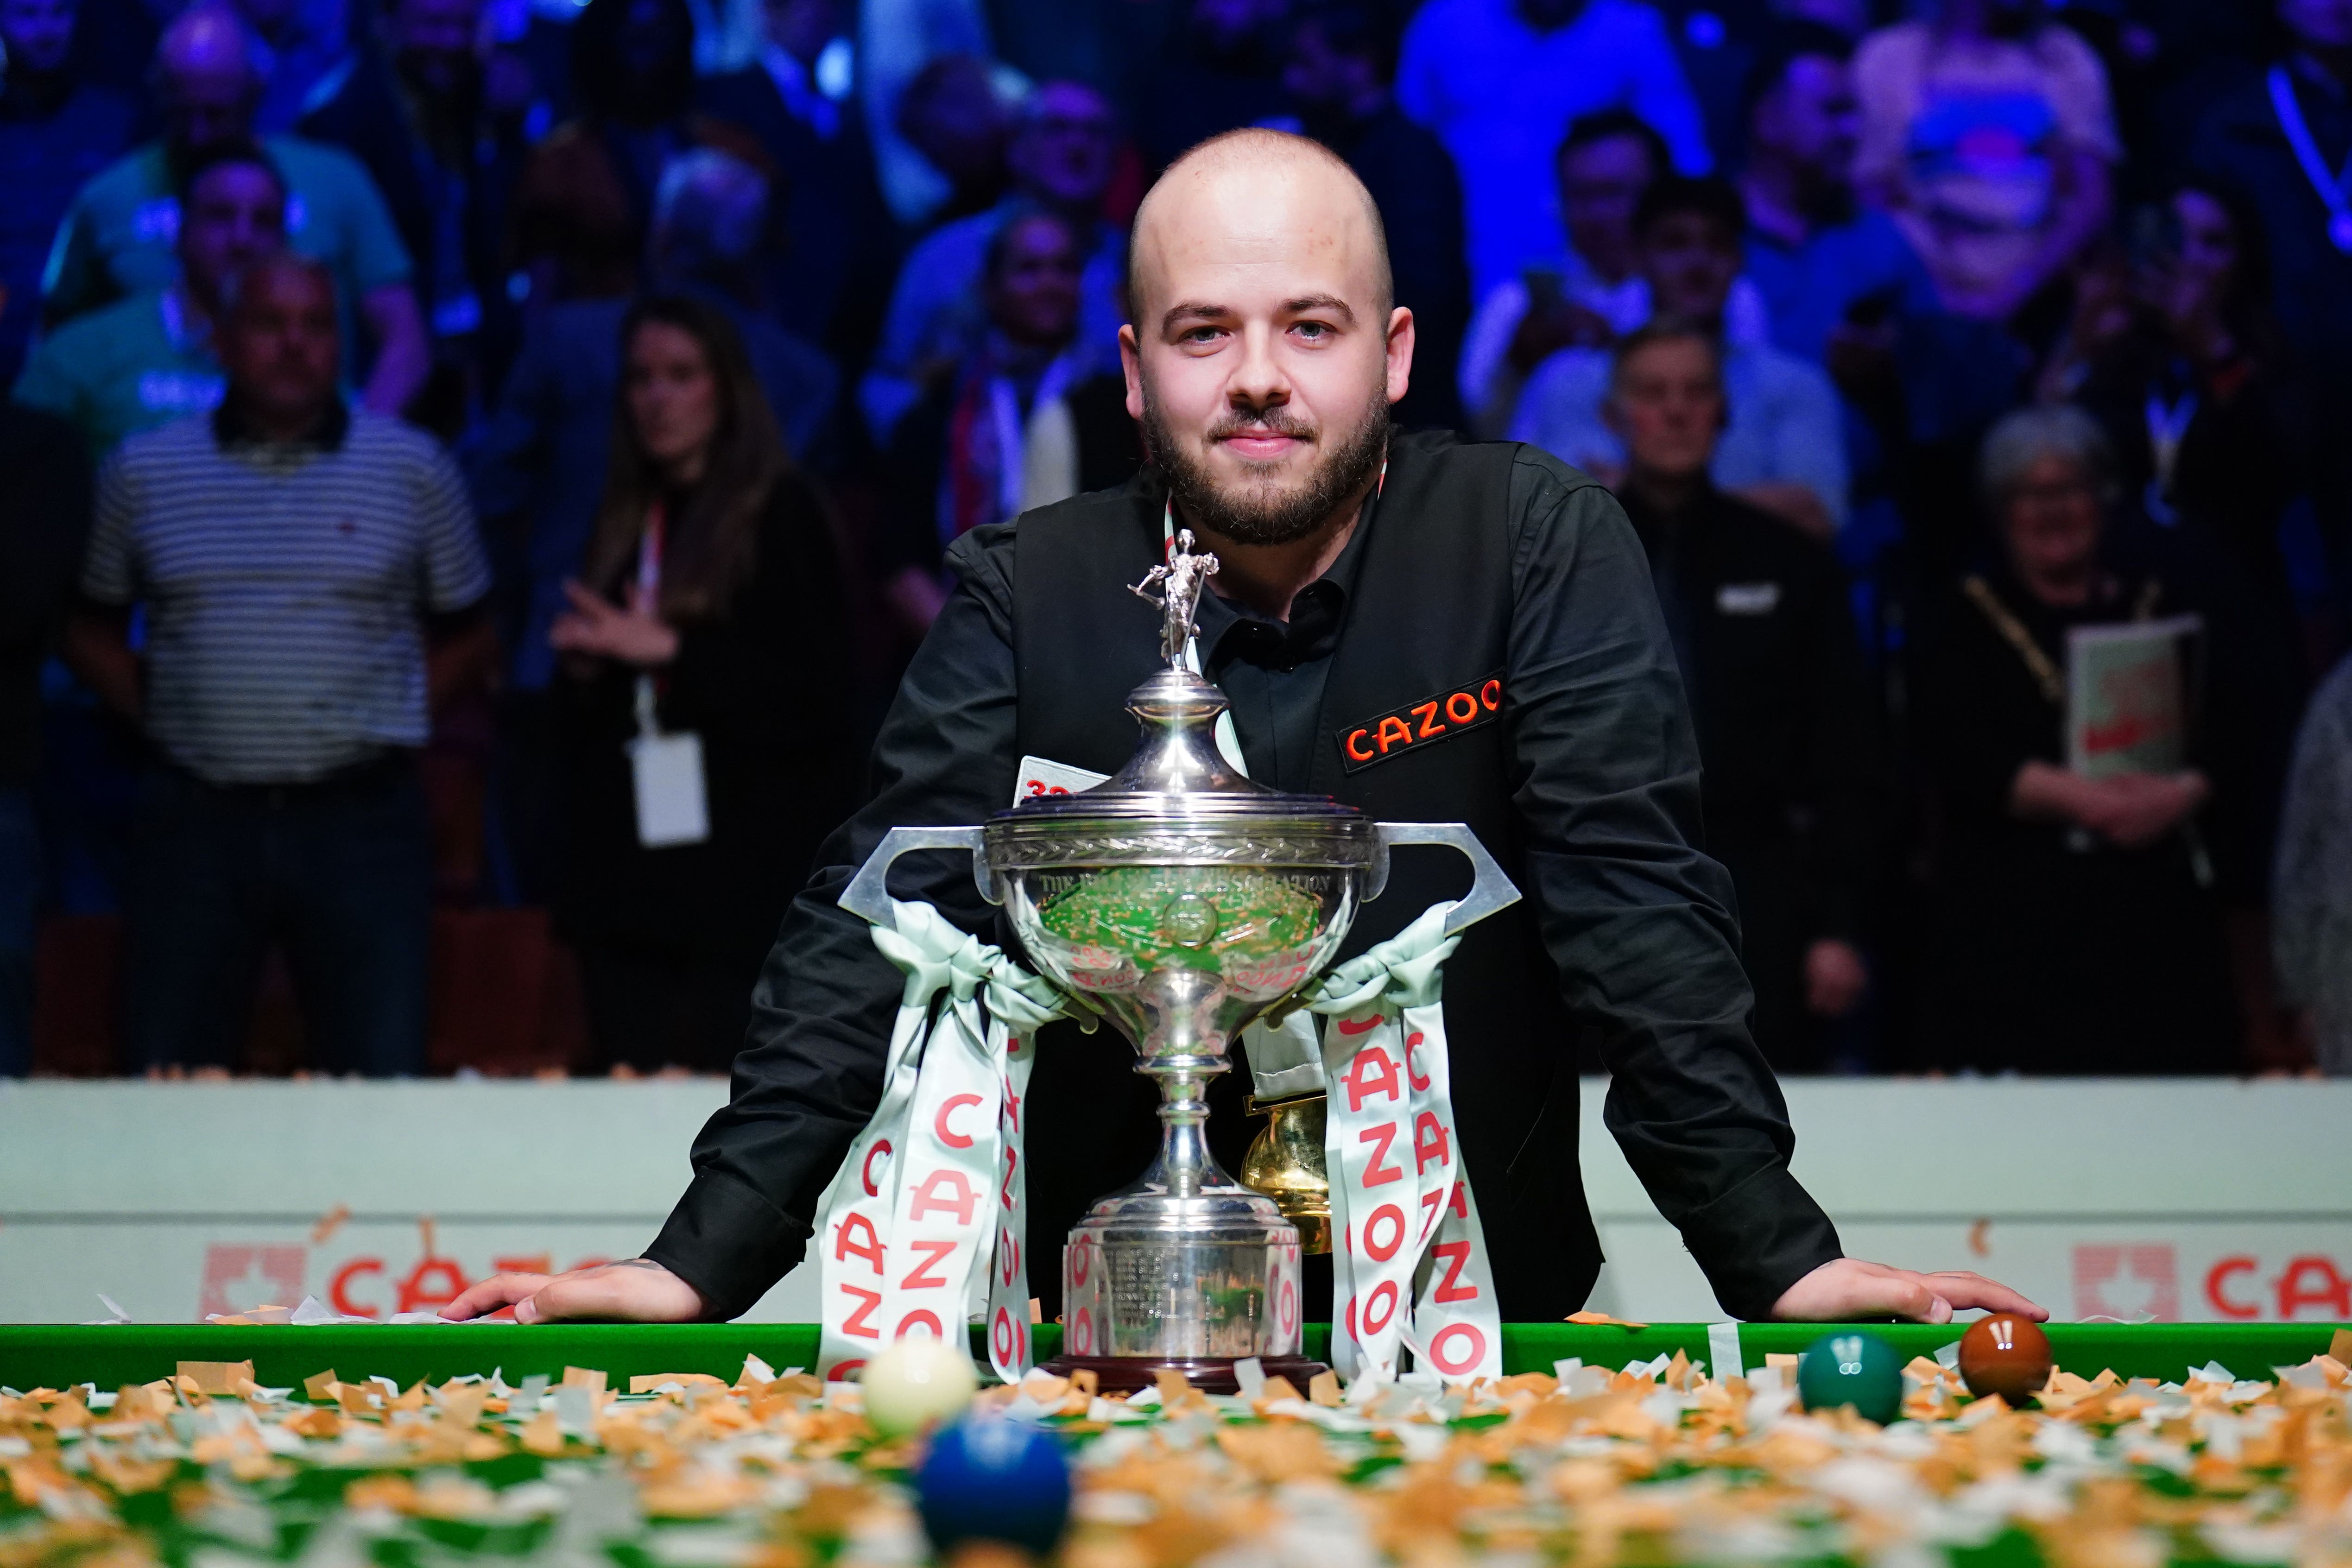 Luca Brecel won the World Snooker Championship title in Sheffield last year